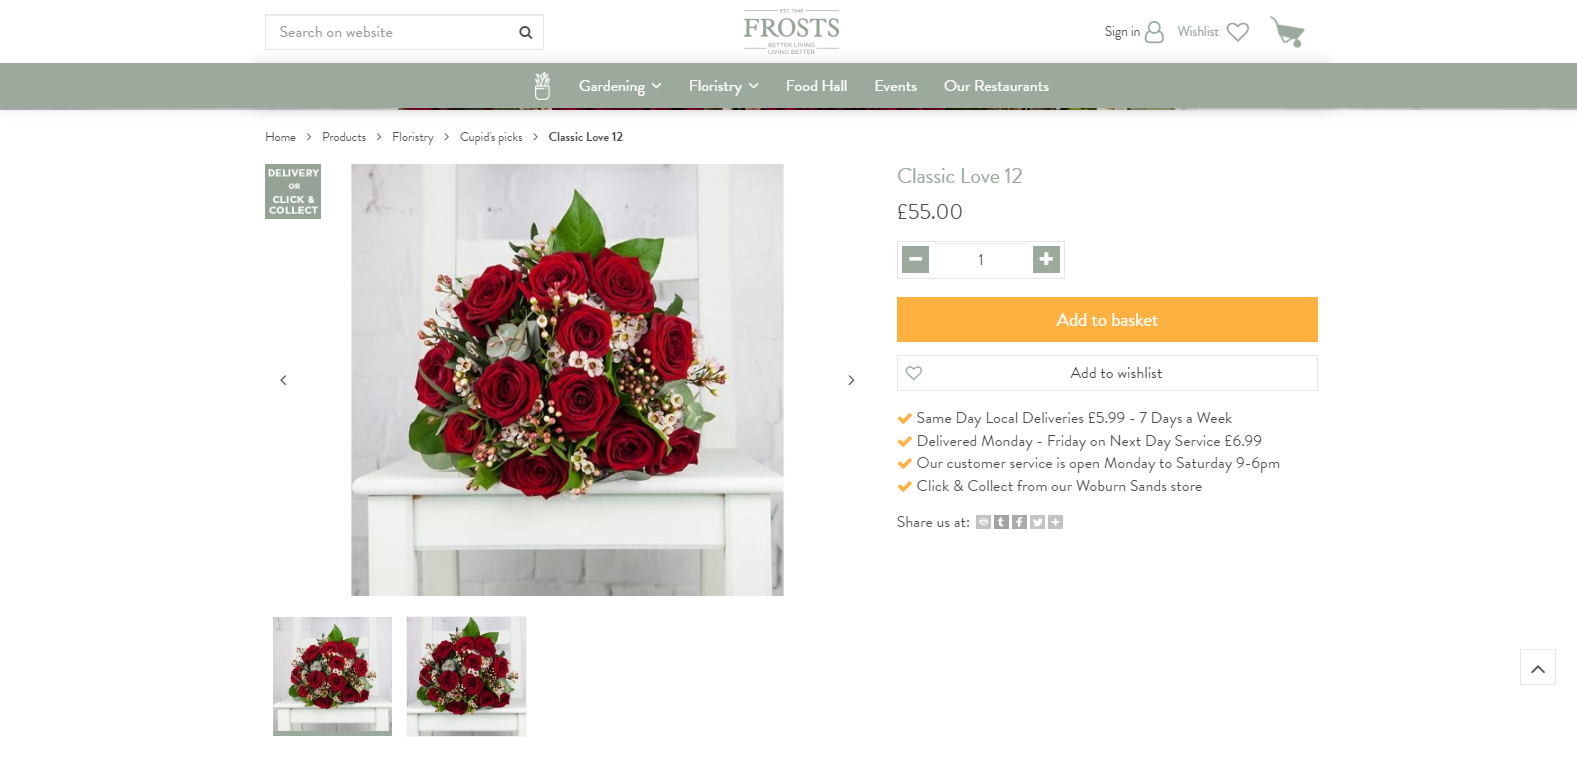 Do you sell flowers online?